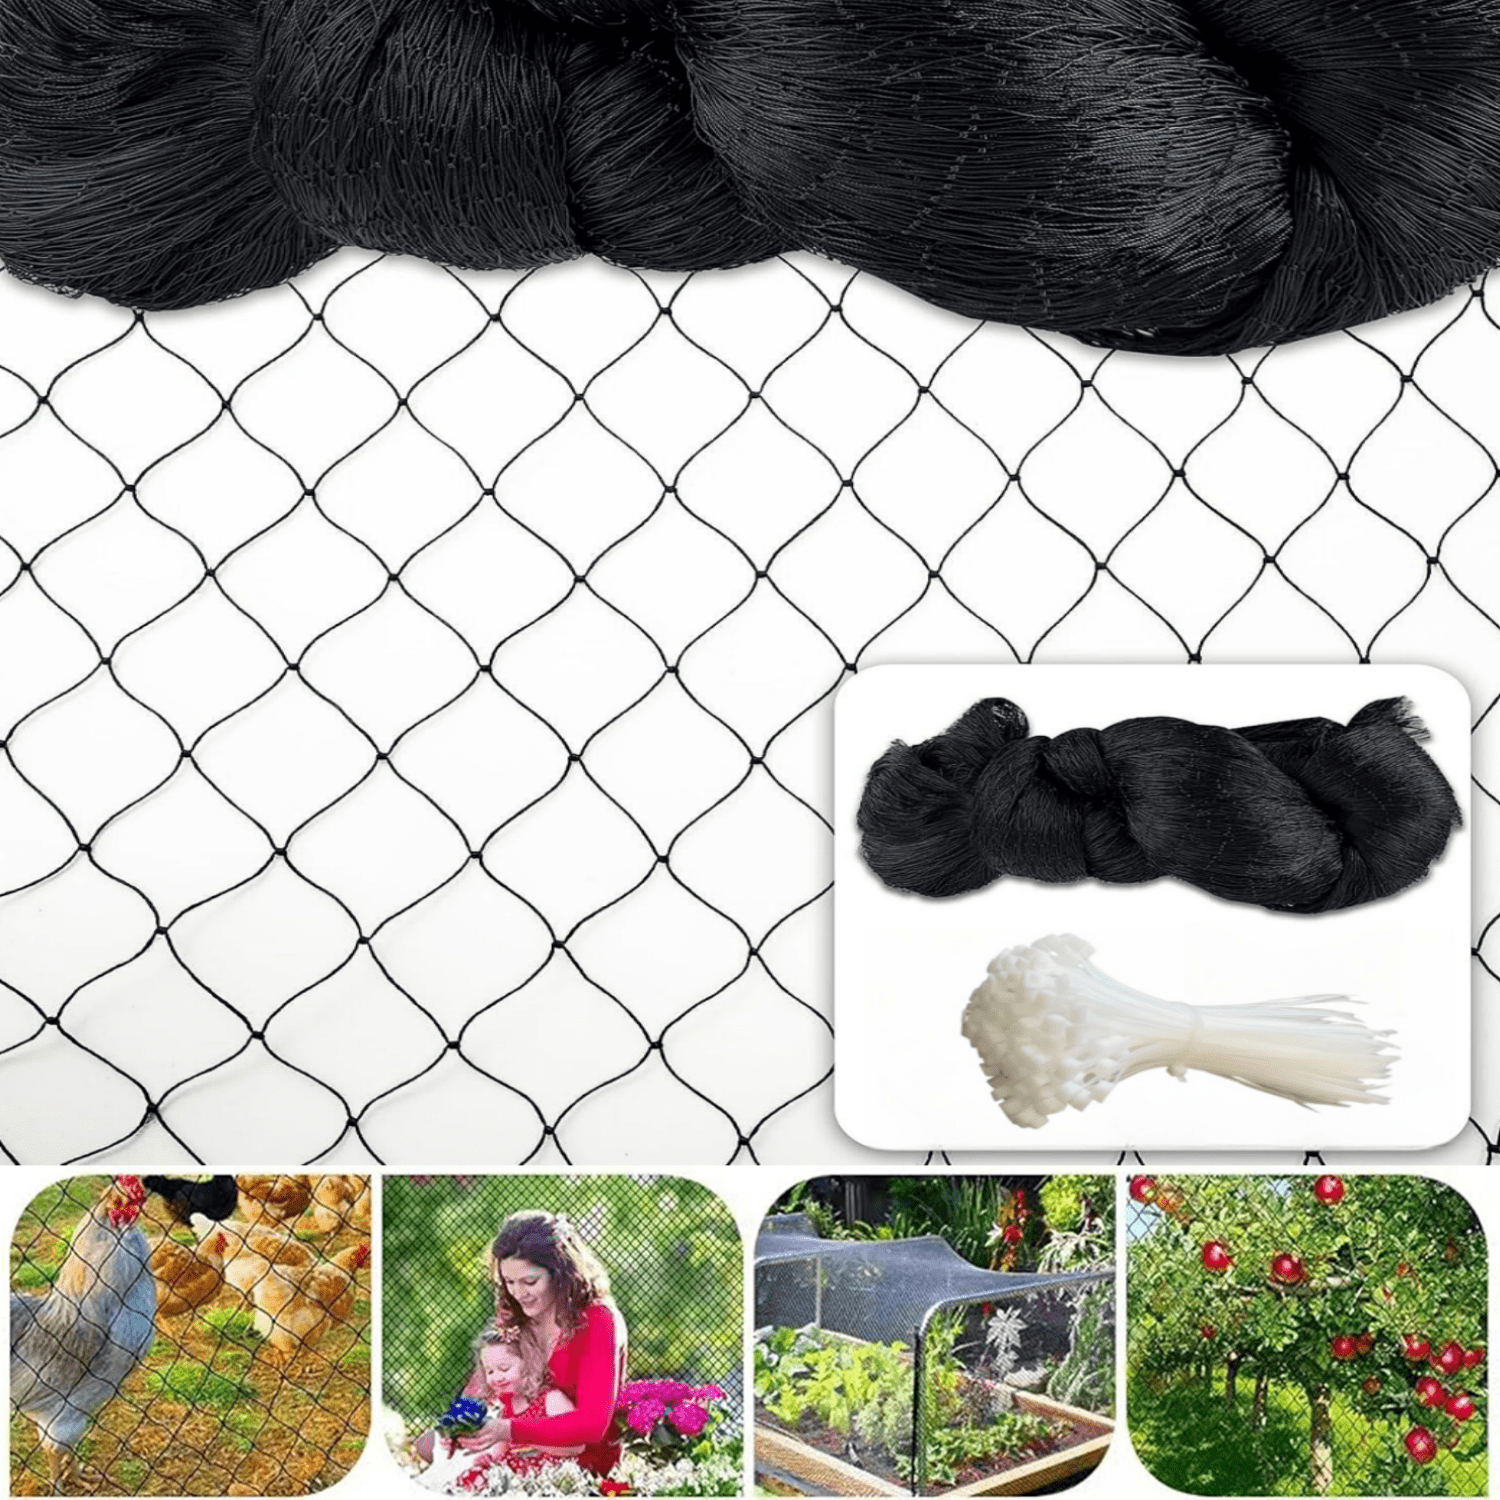 Bird Netting, Yitumu 25x50 ft Garden Netting with 1 in Square Mesh, Protect Plants/Fruit Tree/Vegetables from Poultry&Birds&Deer&Other Animals, Deer